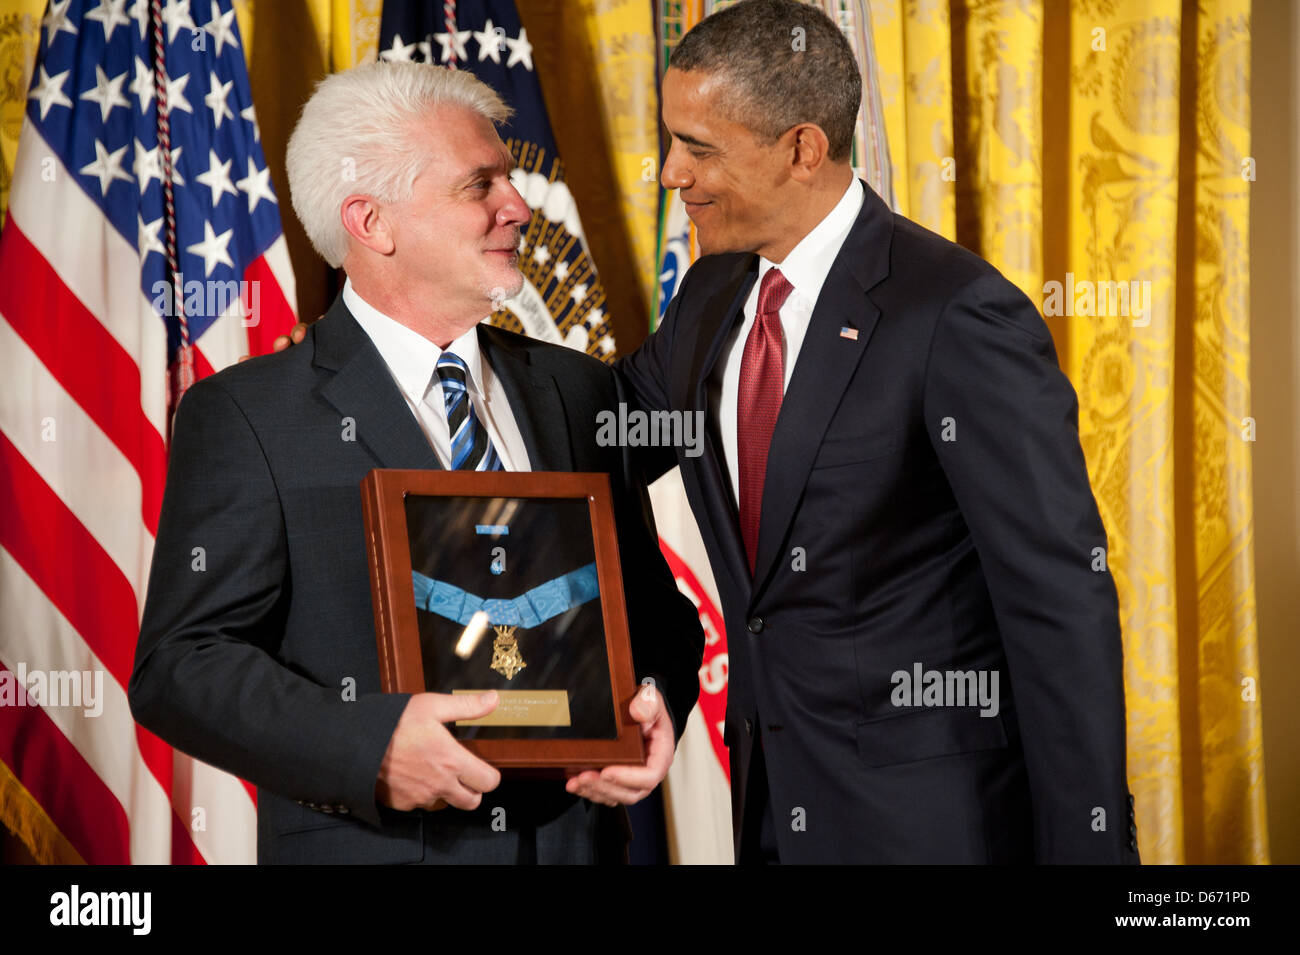 US President Barack Obama awards the Medal of Honor to US Army Chaplain Capt. Emil Kapaun, accepted posthumously by his nephew Ray, left, during a ceremony in the East Room of the White House April 11, 2013 in Washington, DC. Father Kapaun was honored for his heroism during combat at Unsan, Korea and later died as a POW. Stock Photo